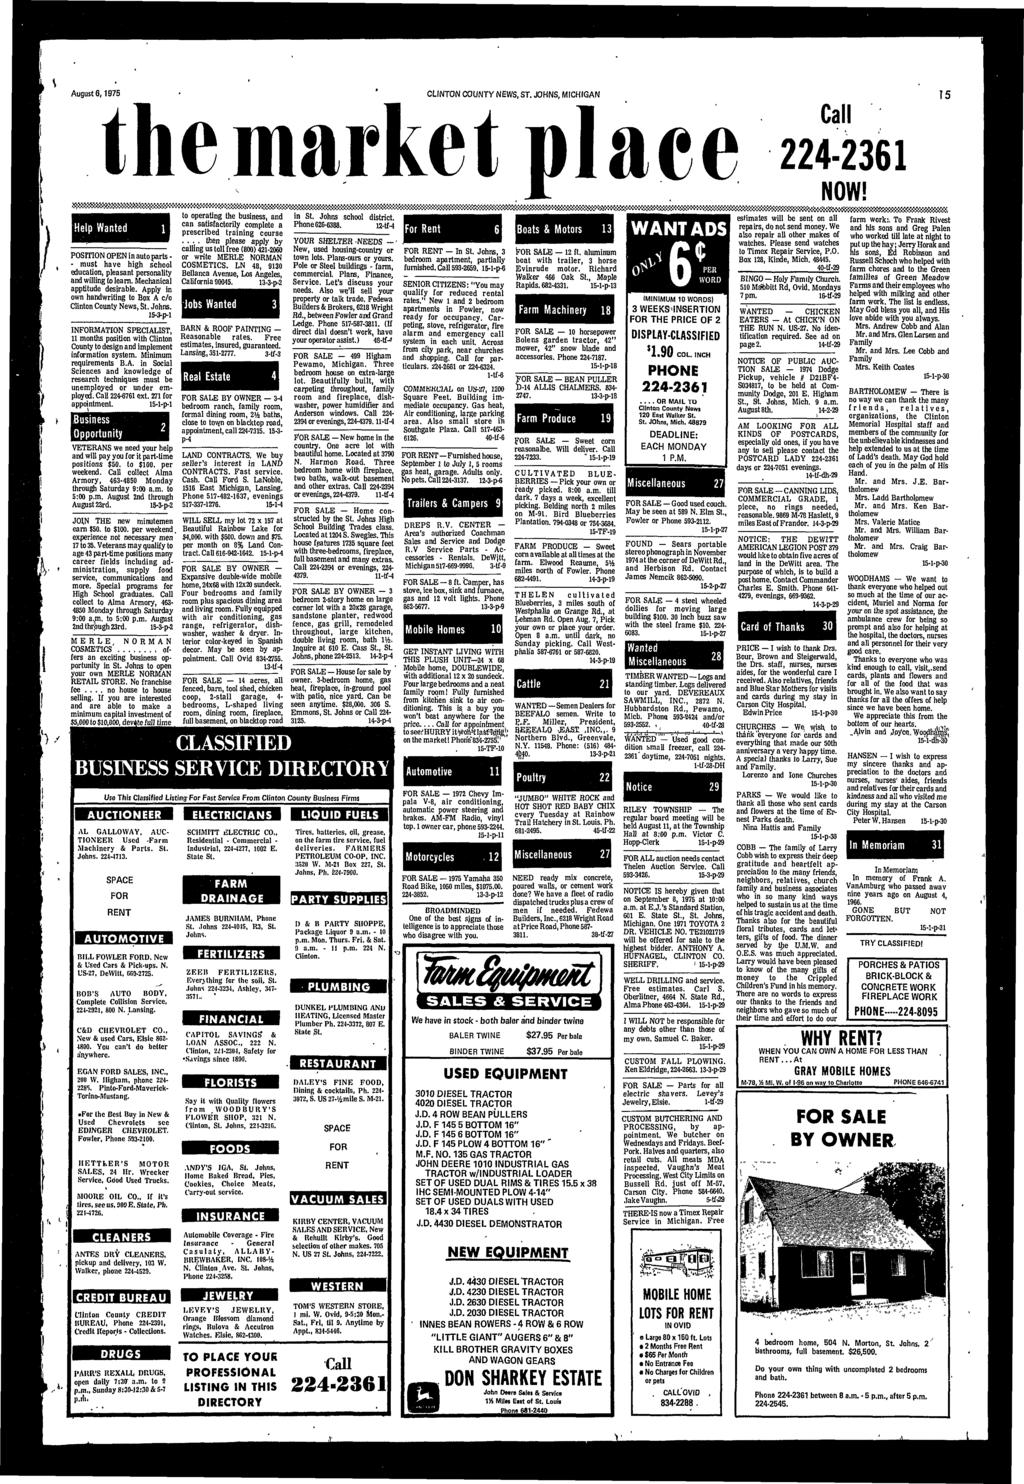 August,1975 CLINTON COUNTY NEWS, ST. JOHNS, MICHIGAN the market place Call 224-231 15 4.